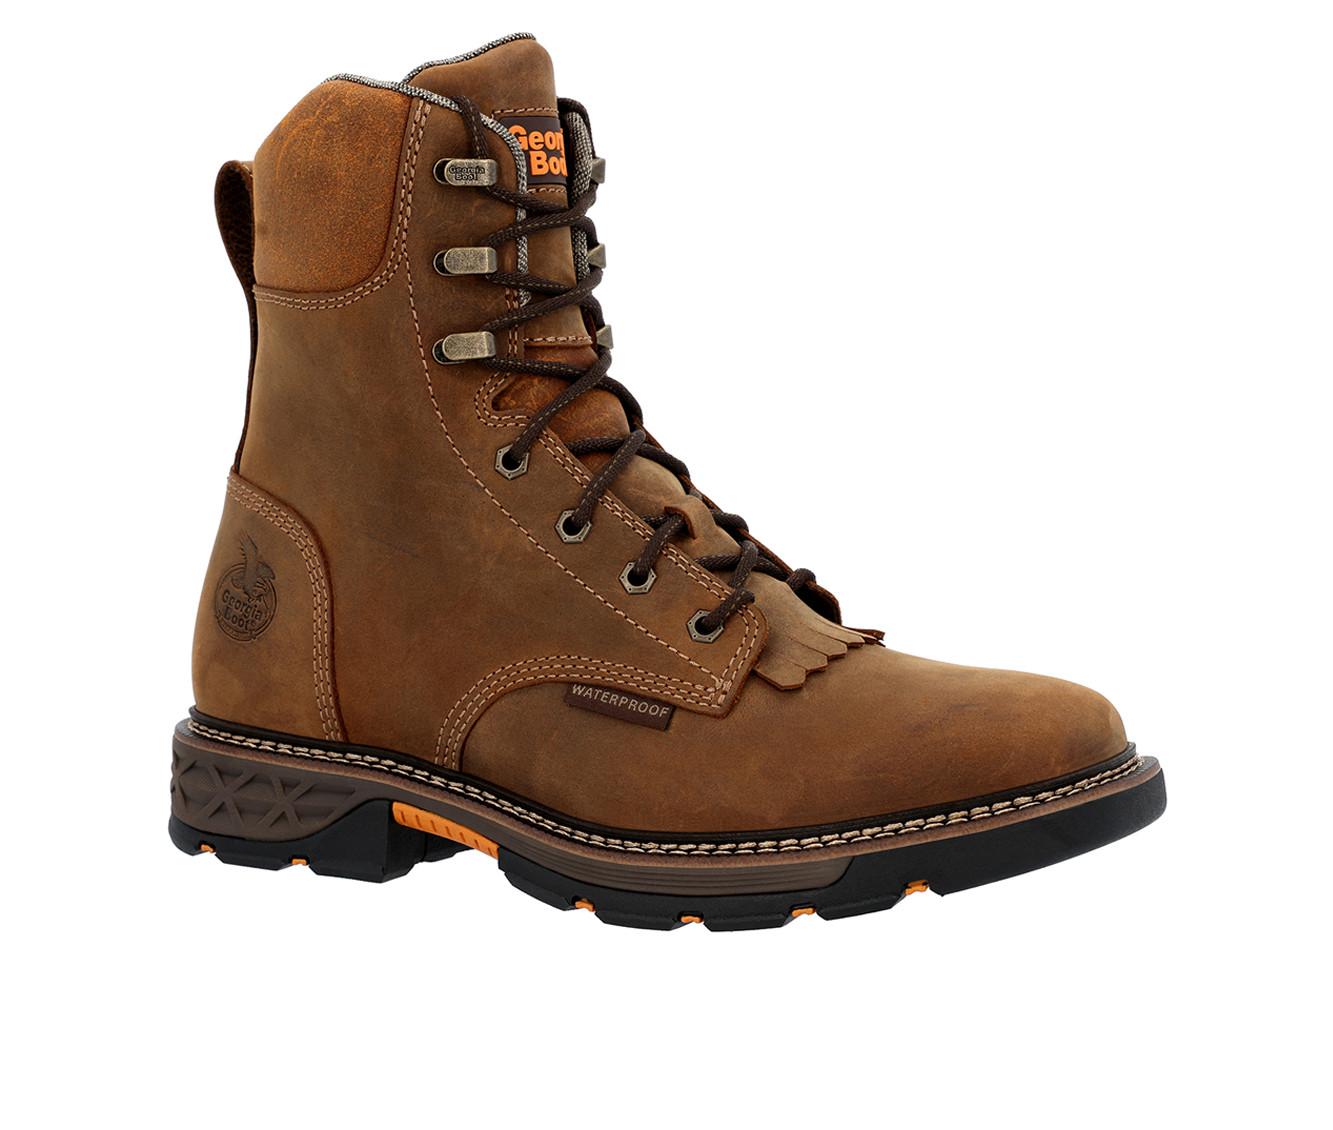 Men's Georgia Boot Carbo-Tec FLX Waterproof Lacer Work Boots